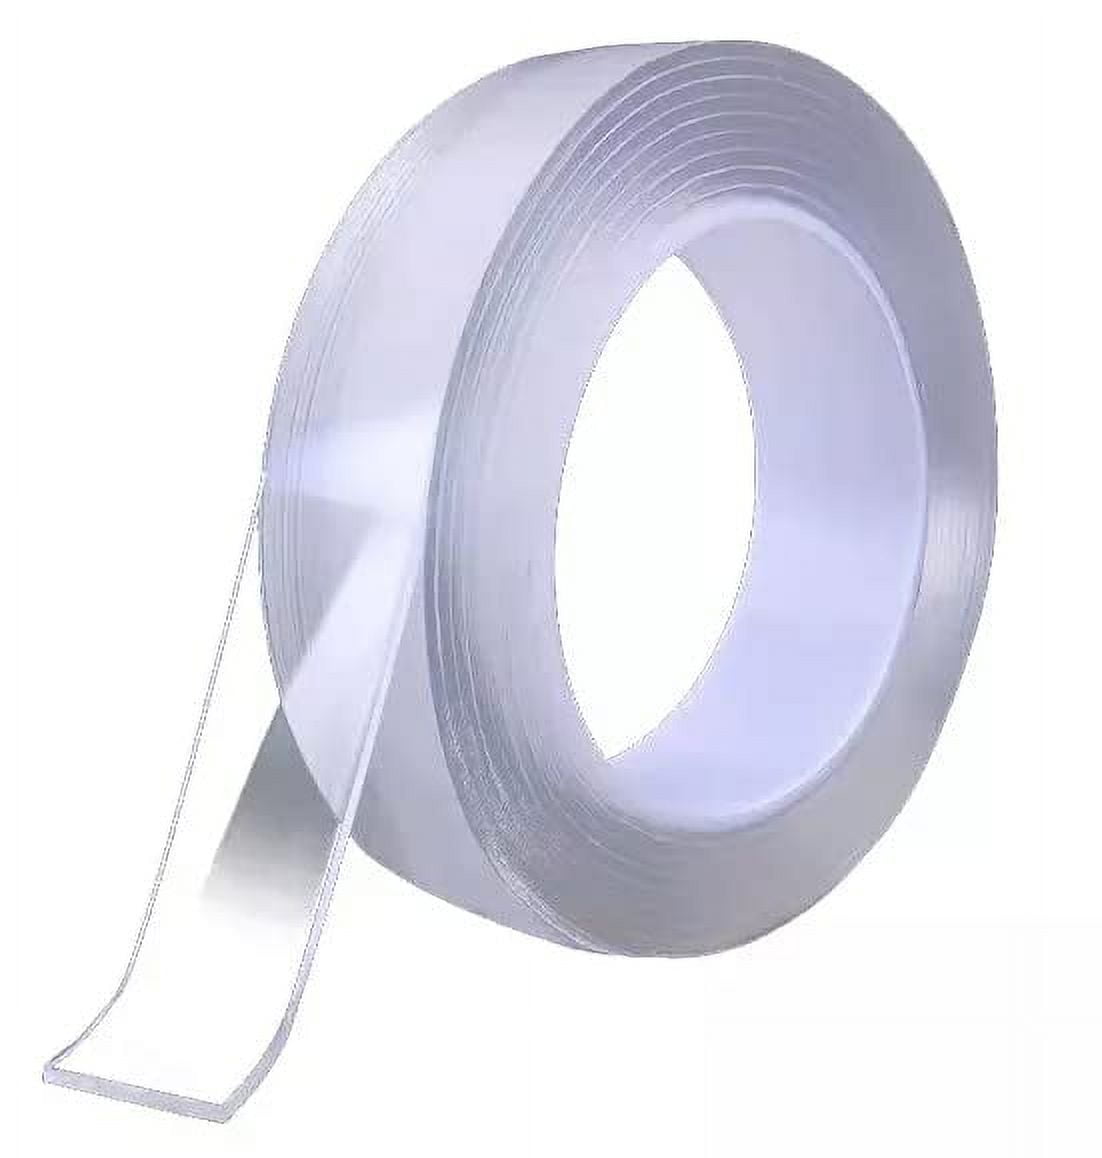 Aeycw Double Sided Tape Heavy Duty, Double Stick Mounting Adhesive Tape  Clear Two Sided Wall Tape Strips, Removable Poster Tape for Home, Office,  Car